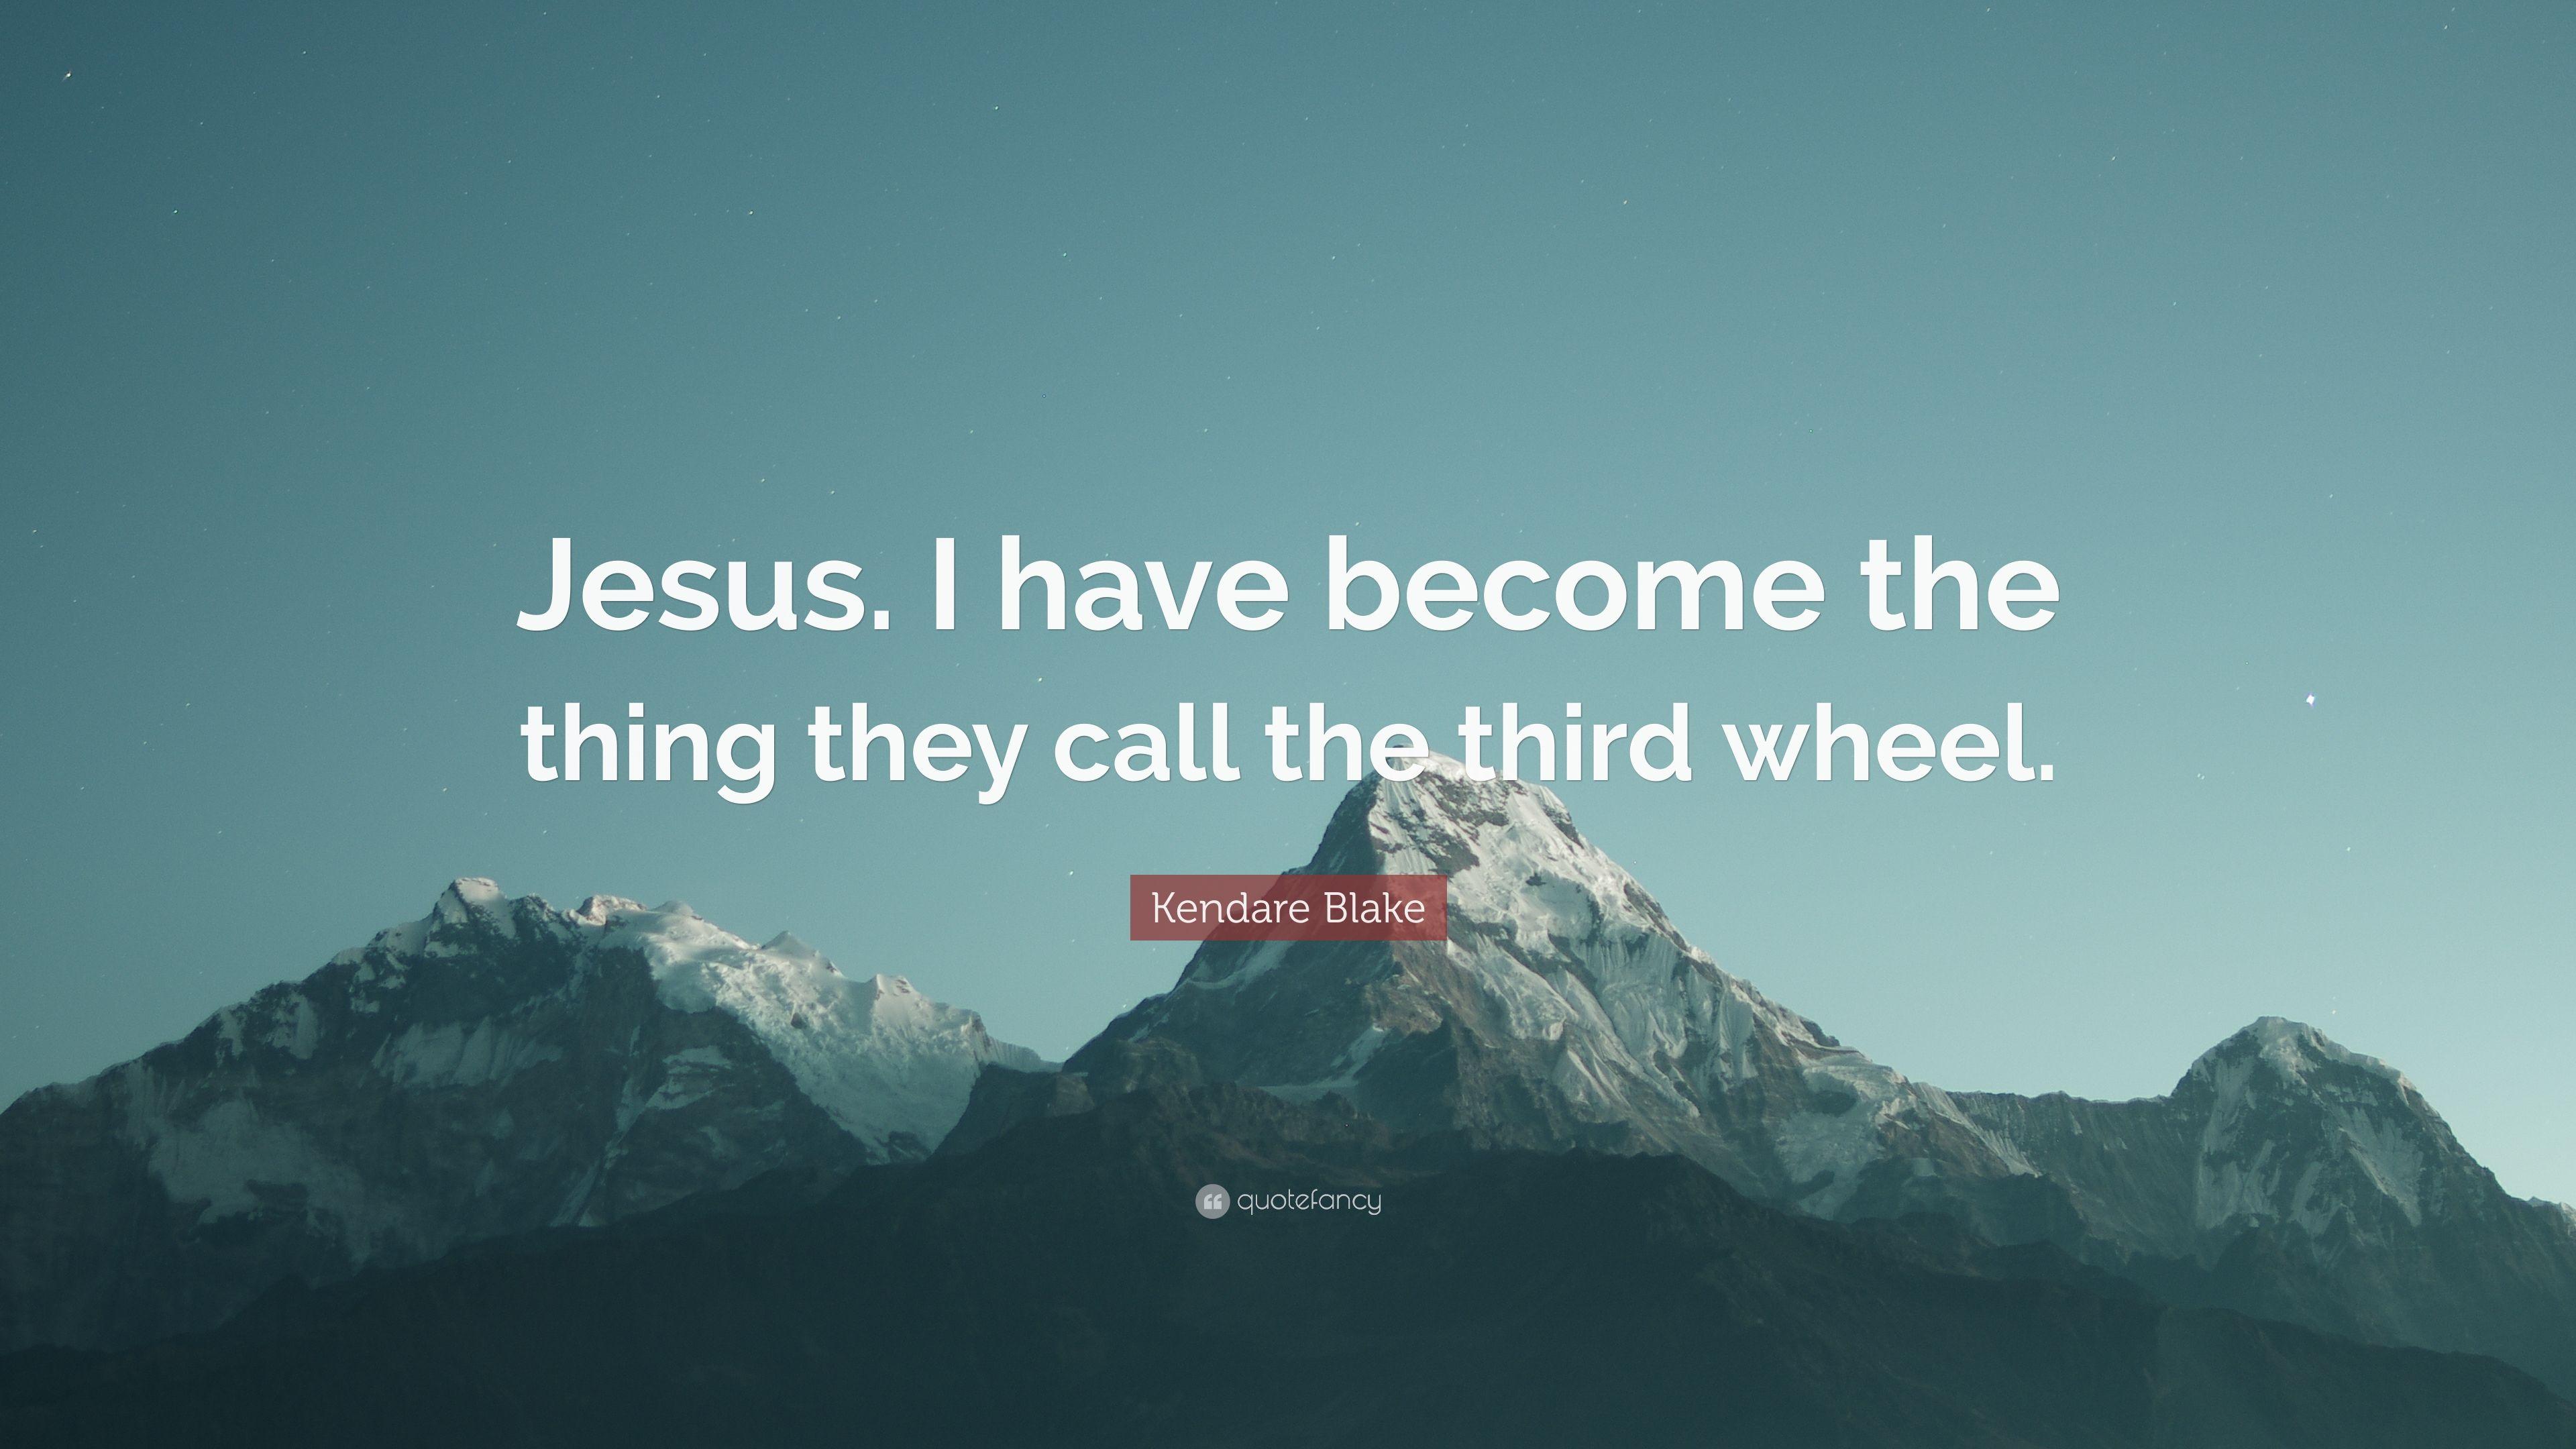 Kendare Blake Quote: “Jesus. I have become the thing they call